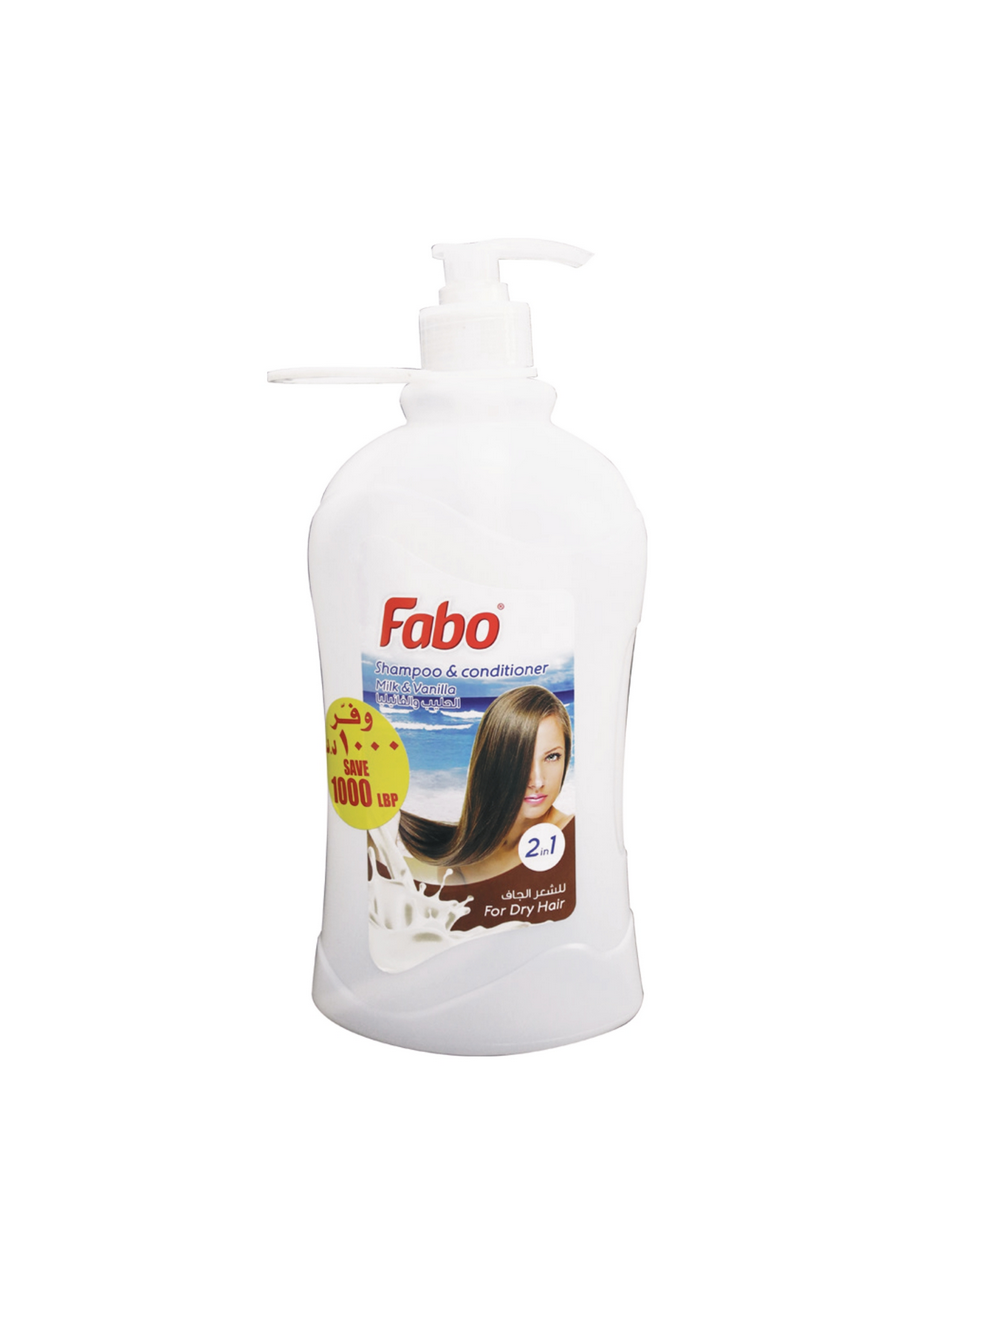 fabo-products_page-0077